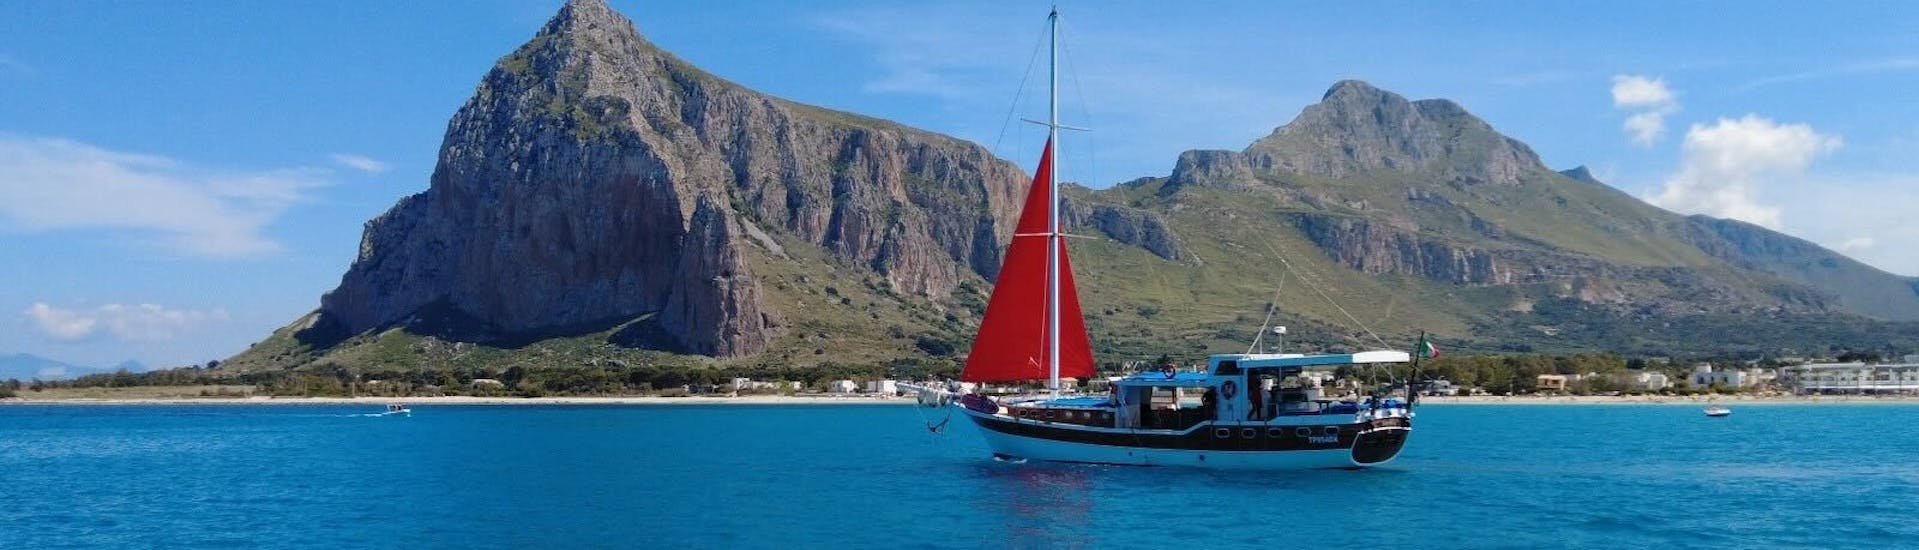 Our beautiful boat in front of the coast of San Vito Lo Capo during the Boat trip along the Riserva dello Zingaro with Lunch with San Vito Coast Charter.